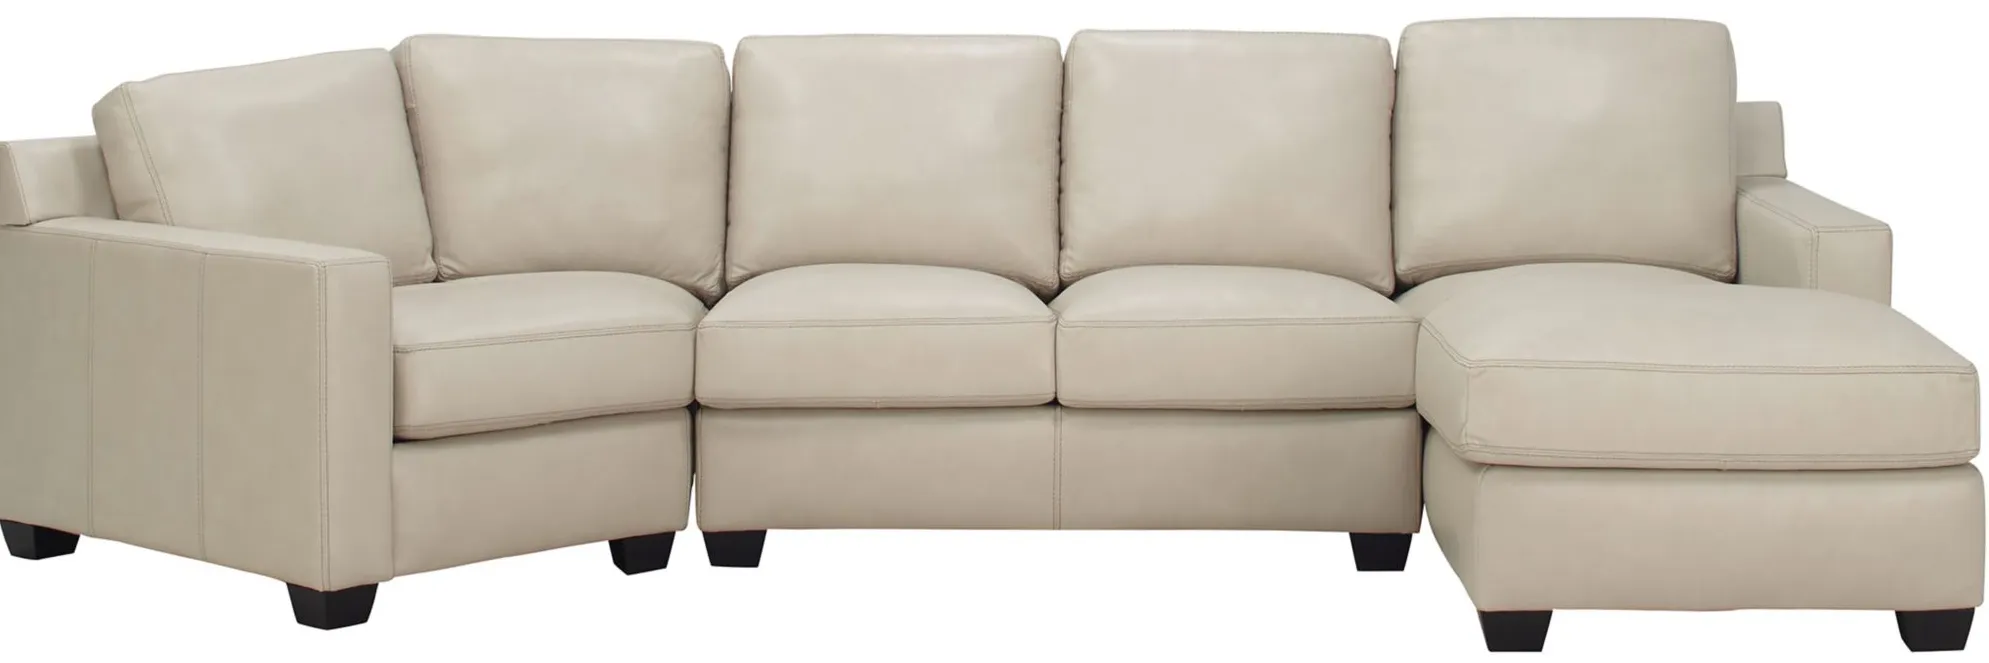 Anaheim Leather 3-pc. Sectional in White by Bellanest